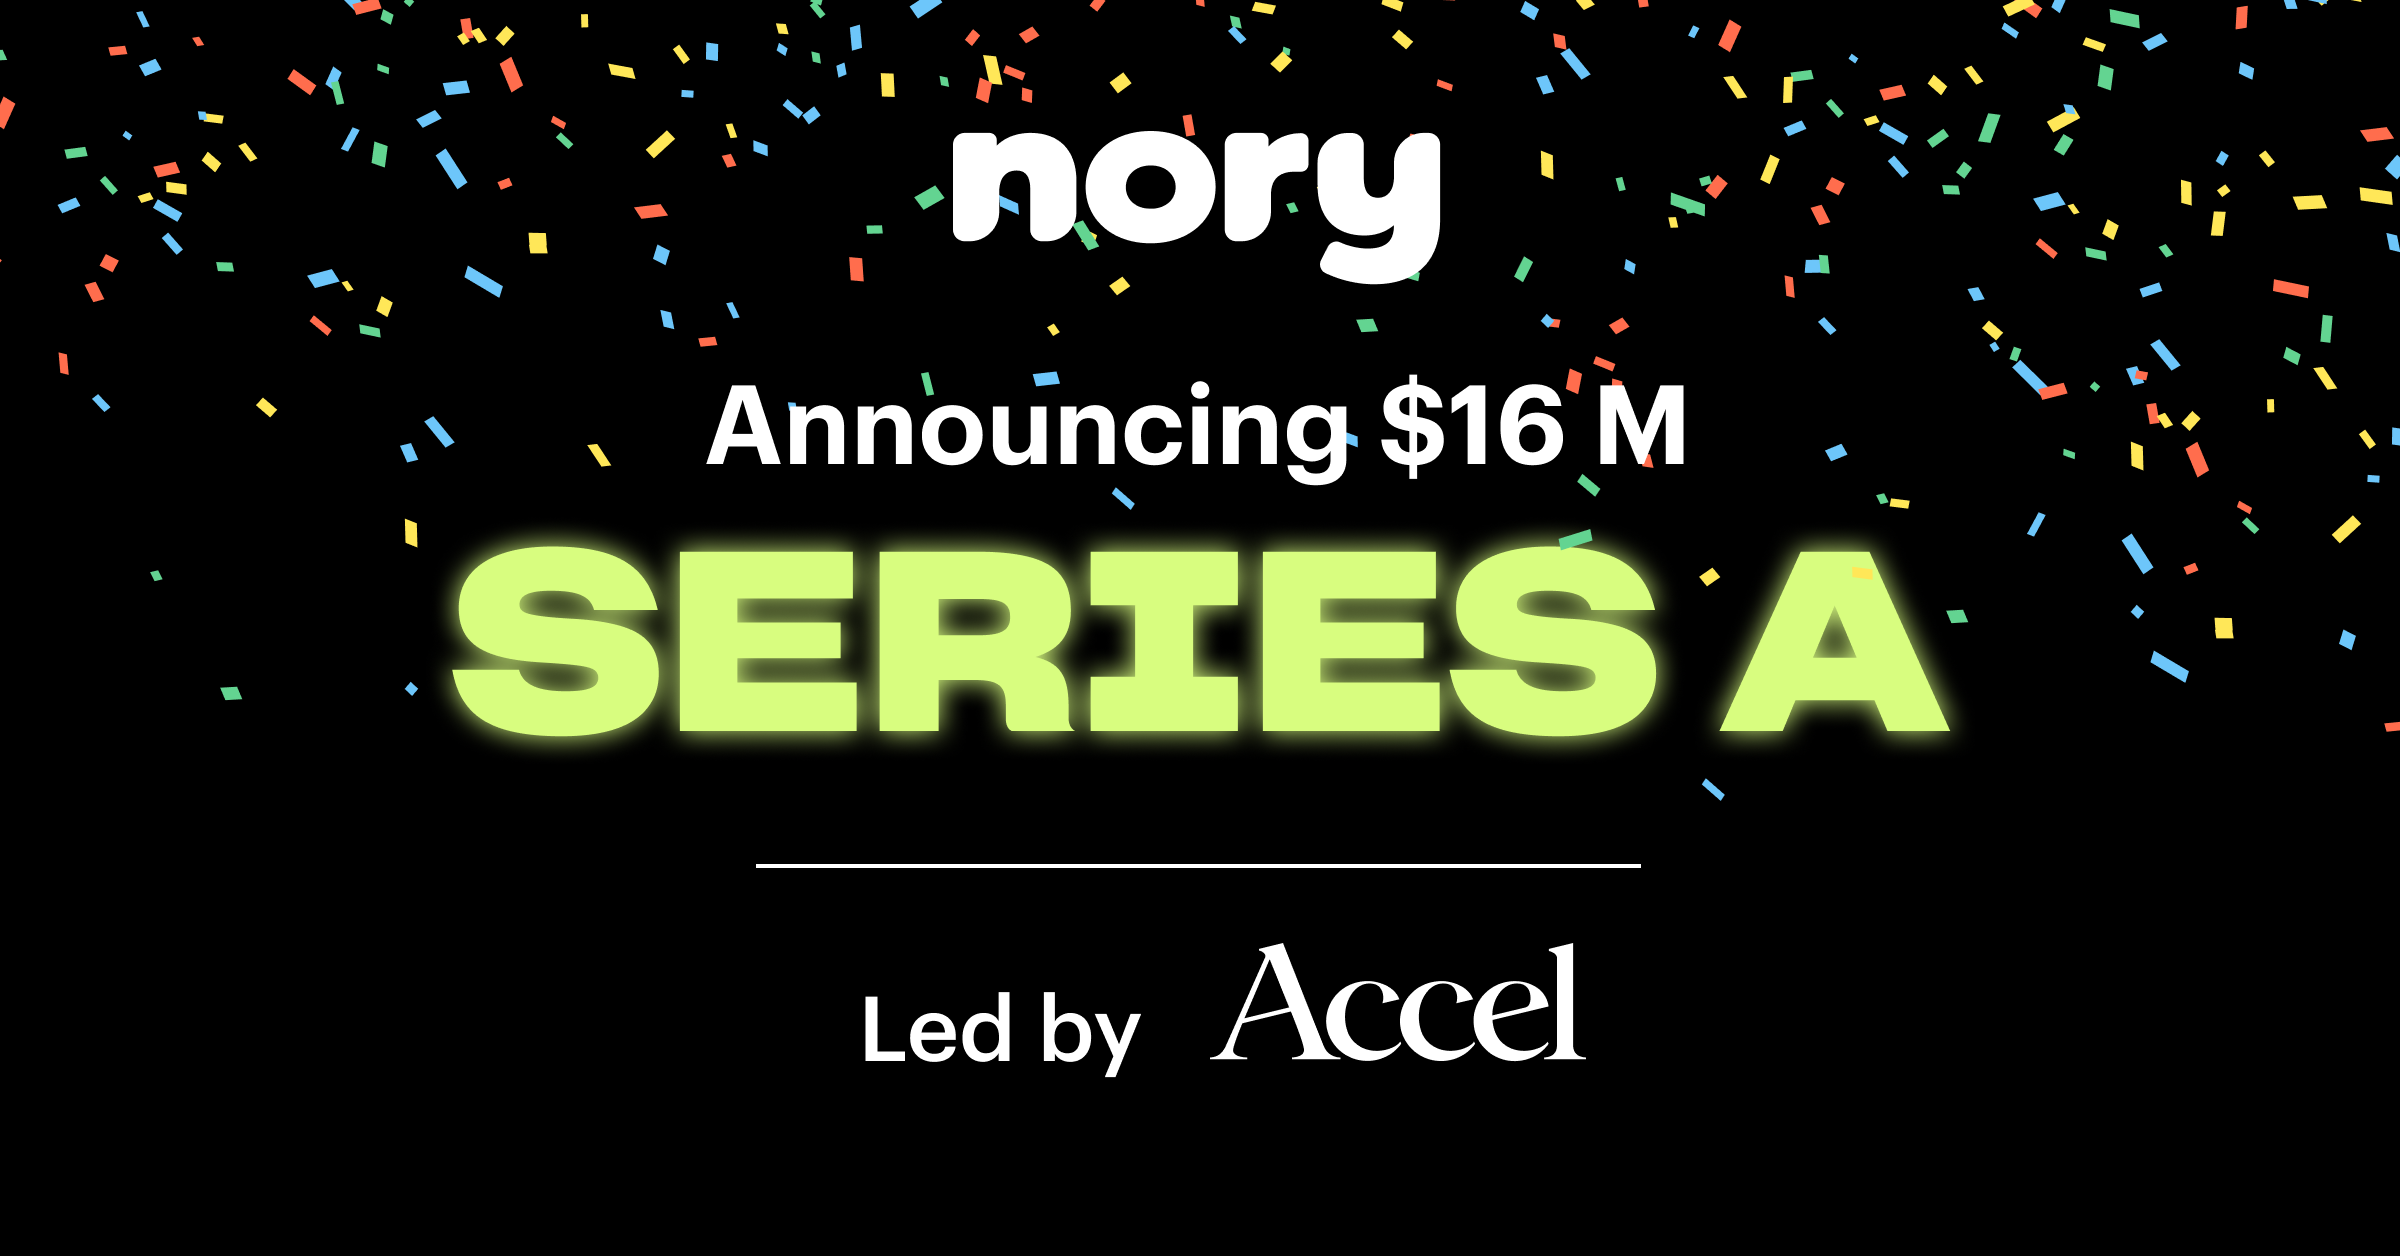 Big news for hospitality! Nory raises $16M in Series A to spearhead AI